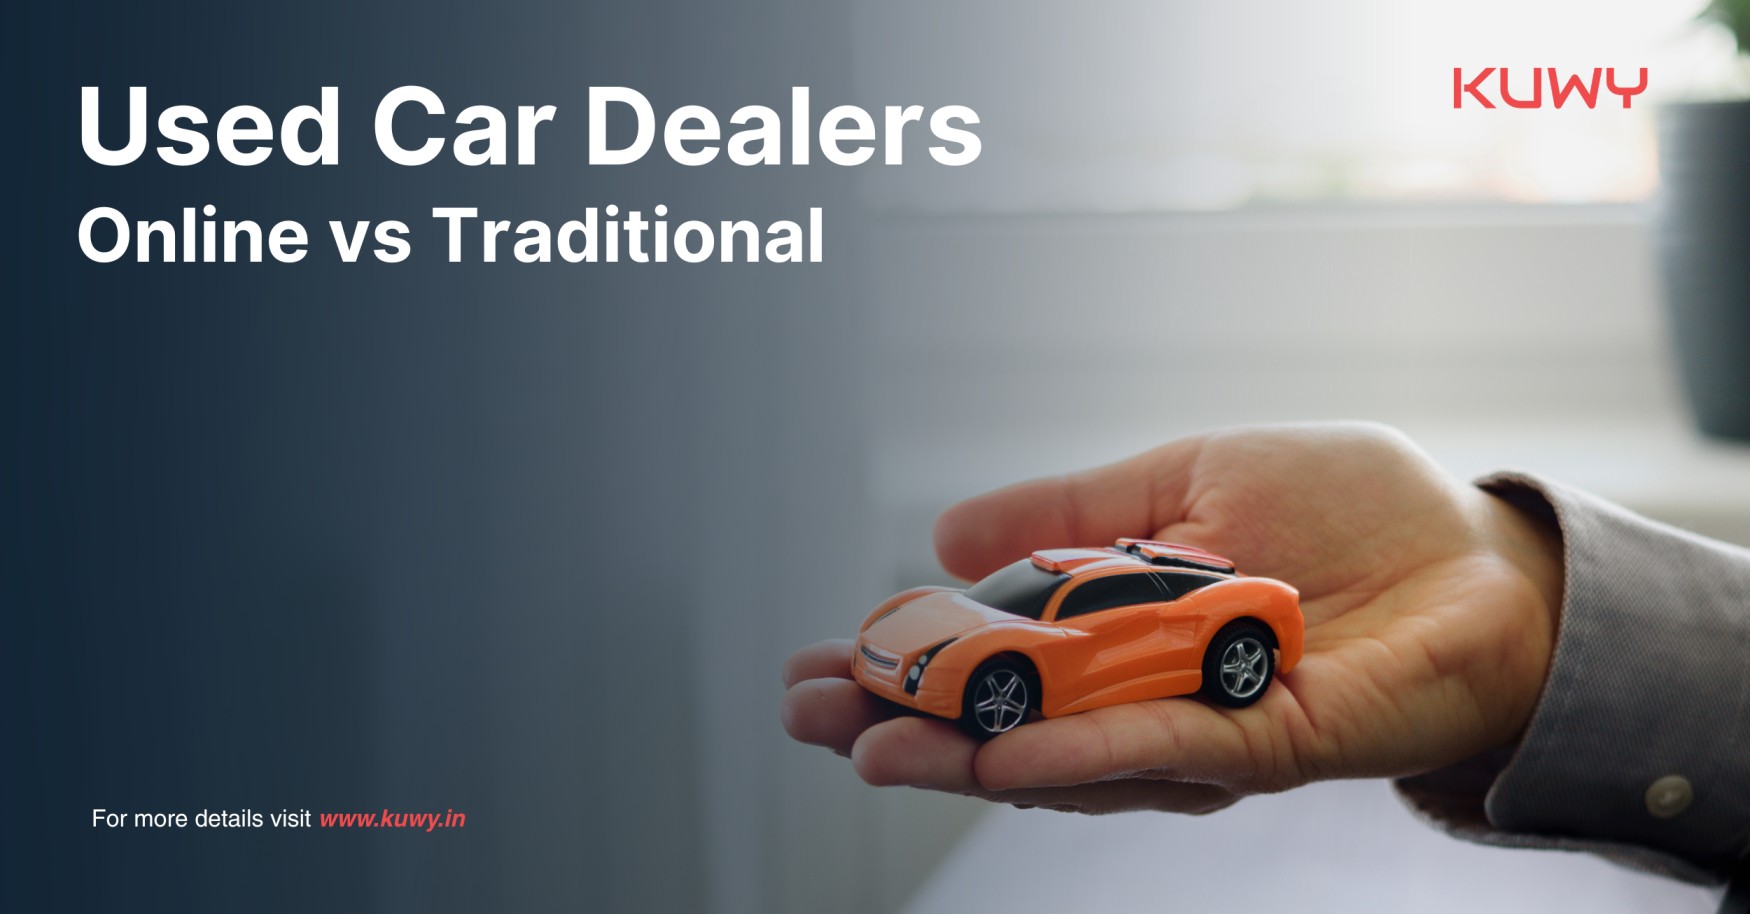 Used Car Dealers : Online vs Traditional